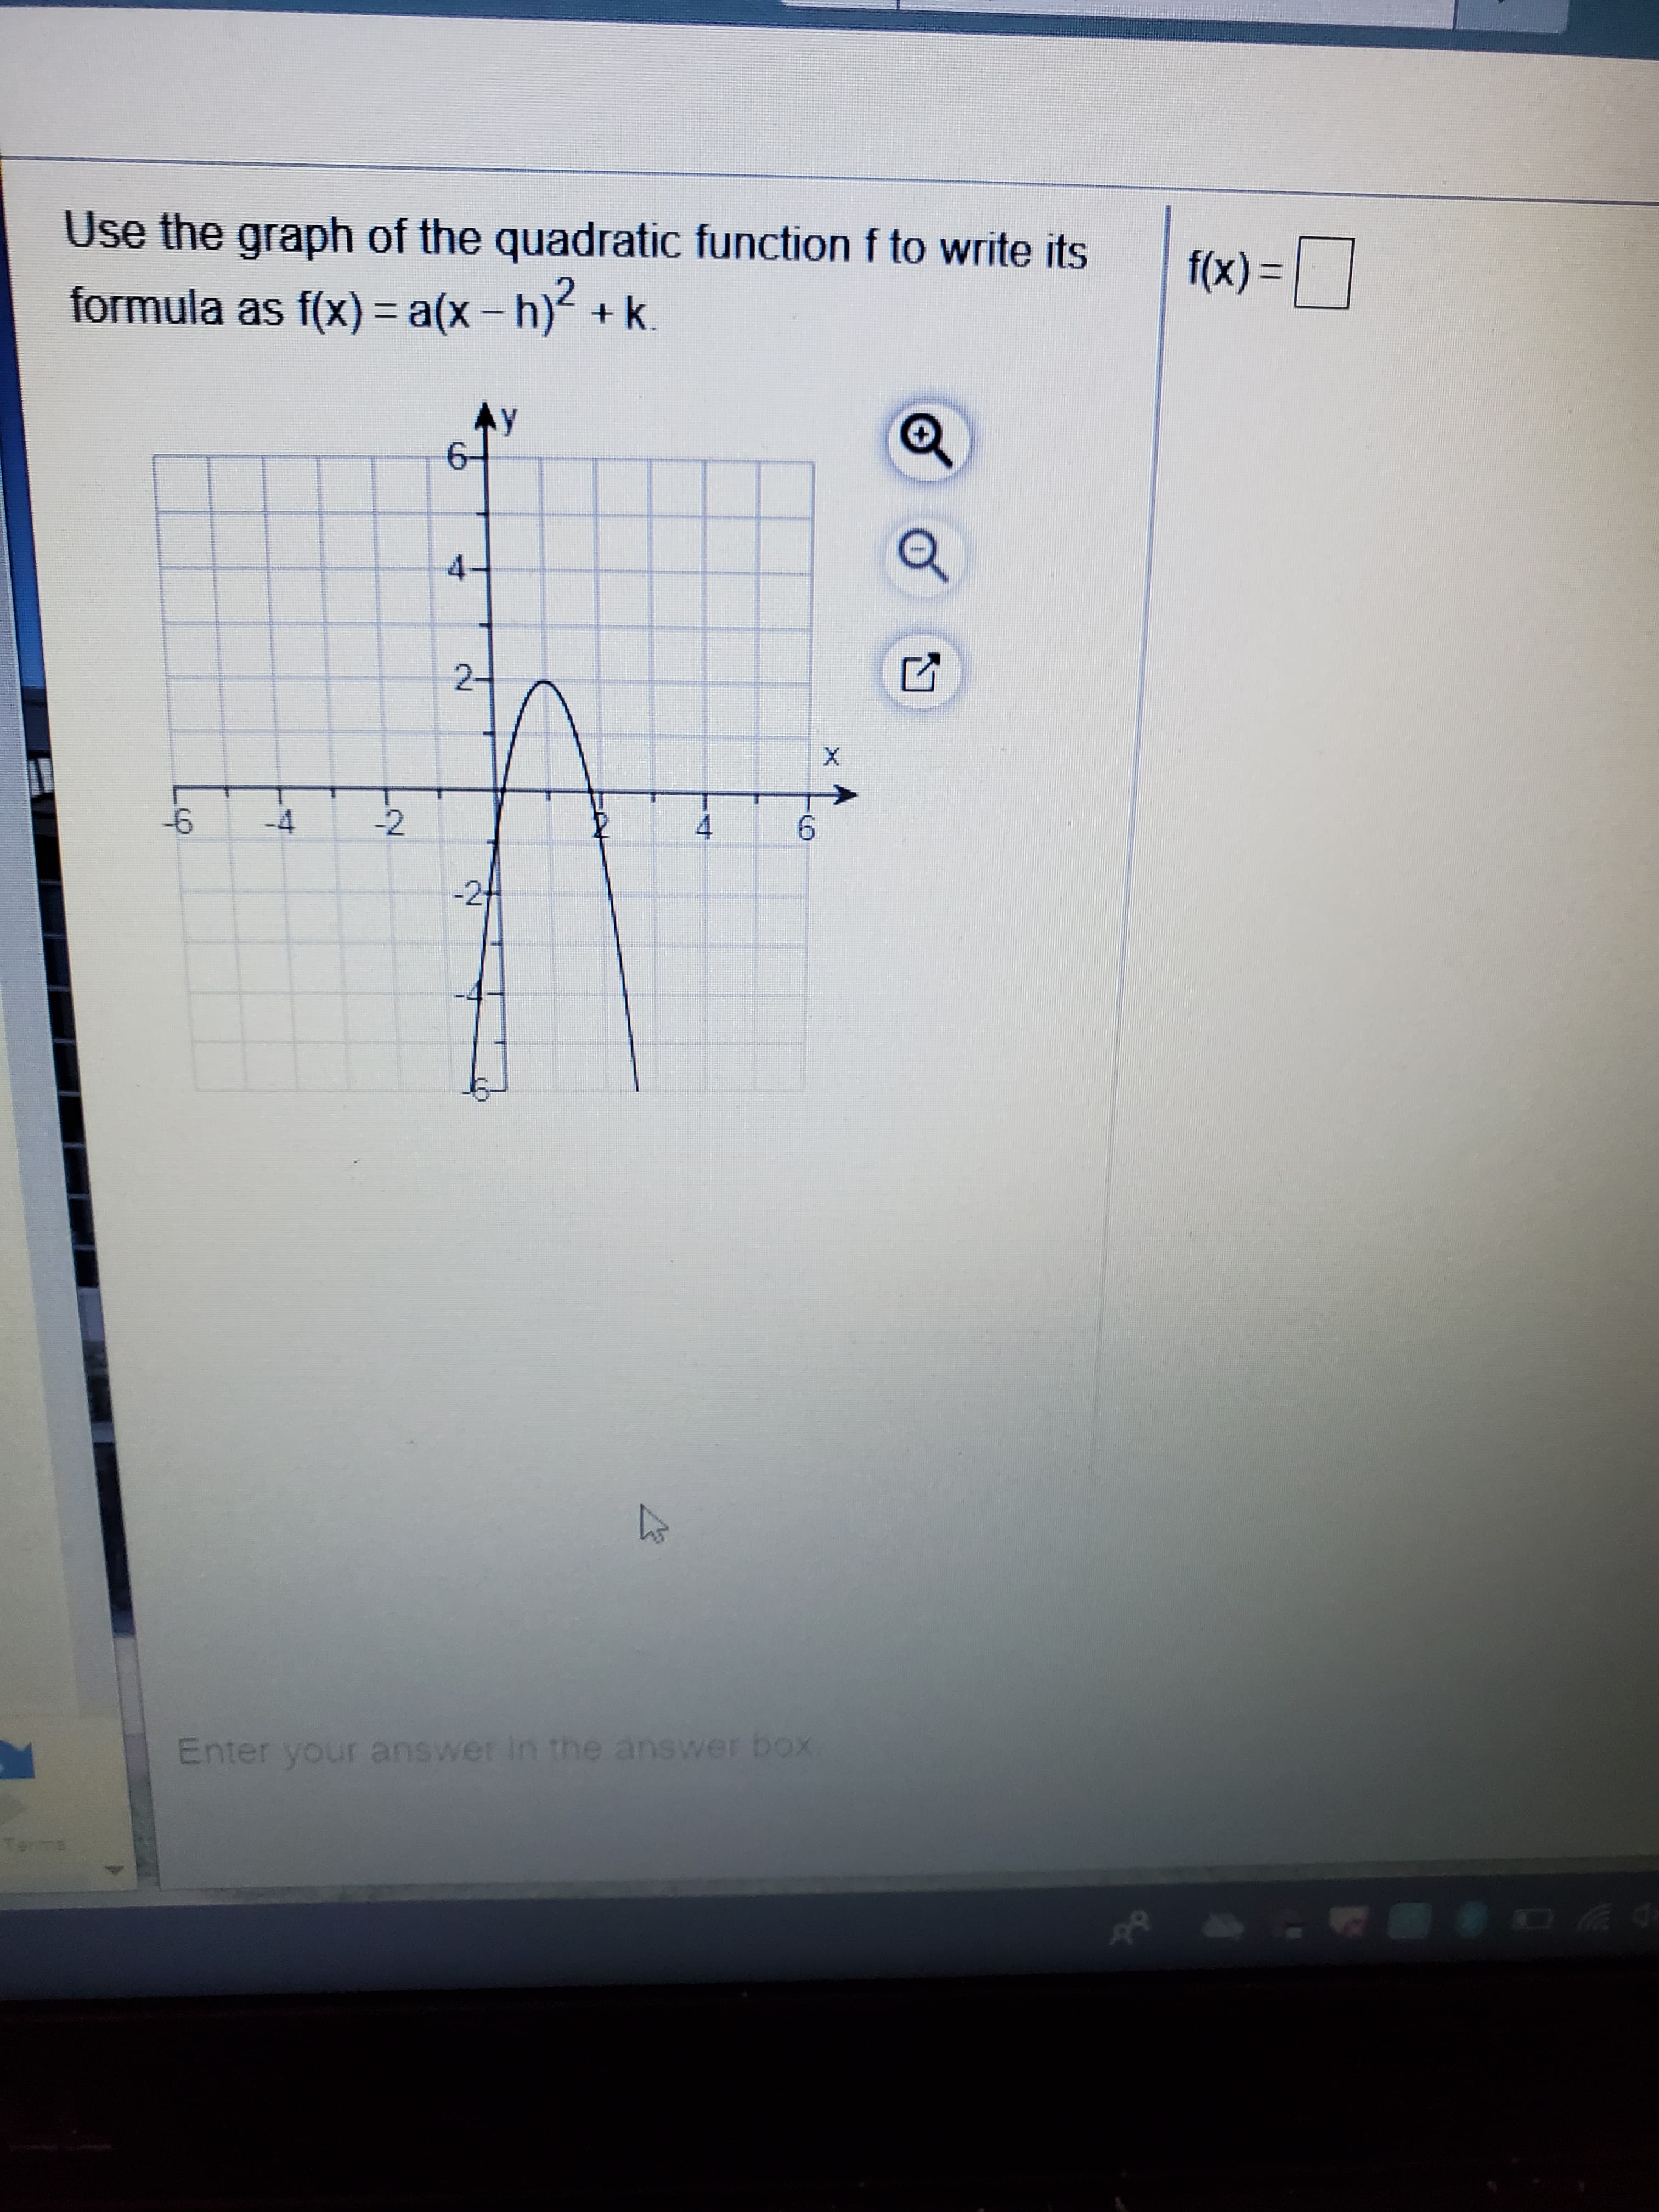 Use the graph of the quadratic function f to write its
f(x) =
formula as f(x) = a(x- h) +k.
Ay
4-
2-
up
-4
-2
6.
-2
Enter your answer In the answer box
Terma
4.
